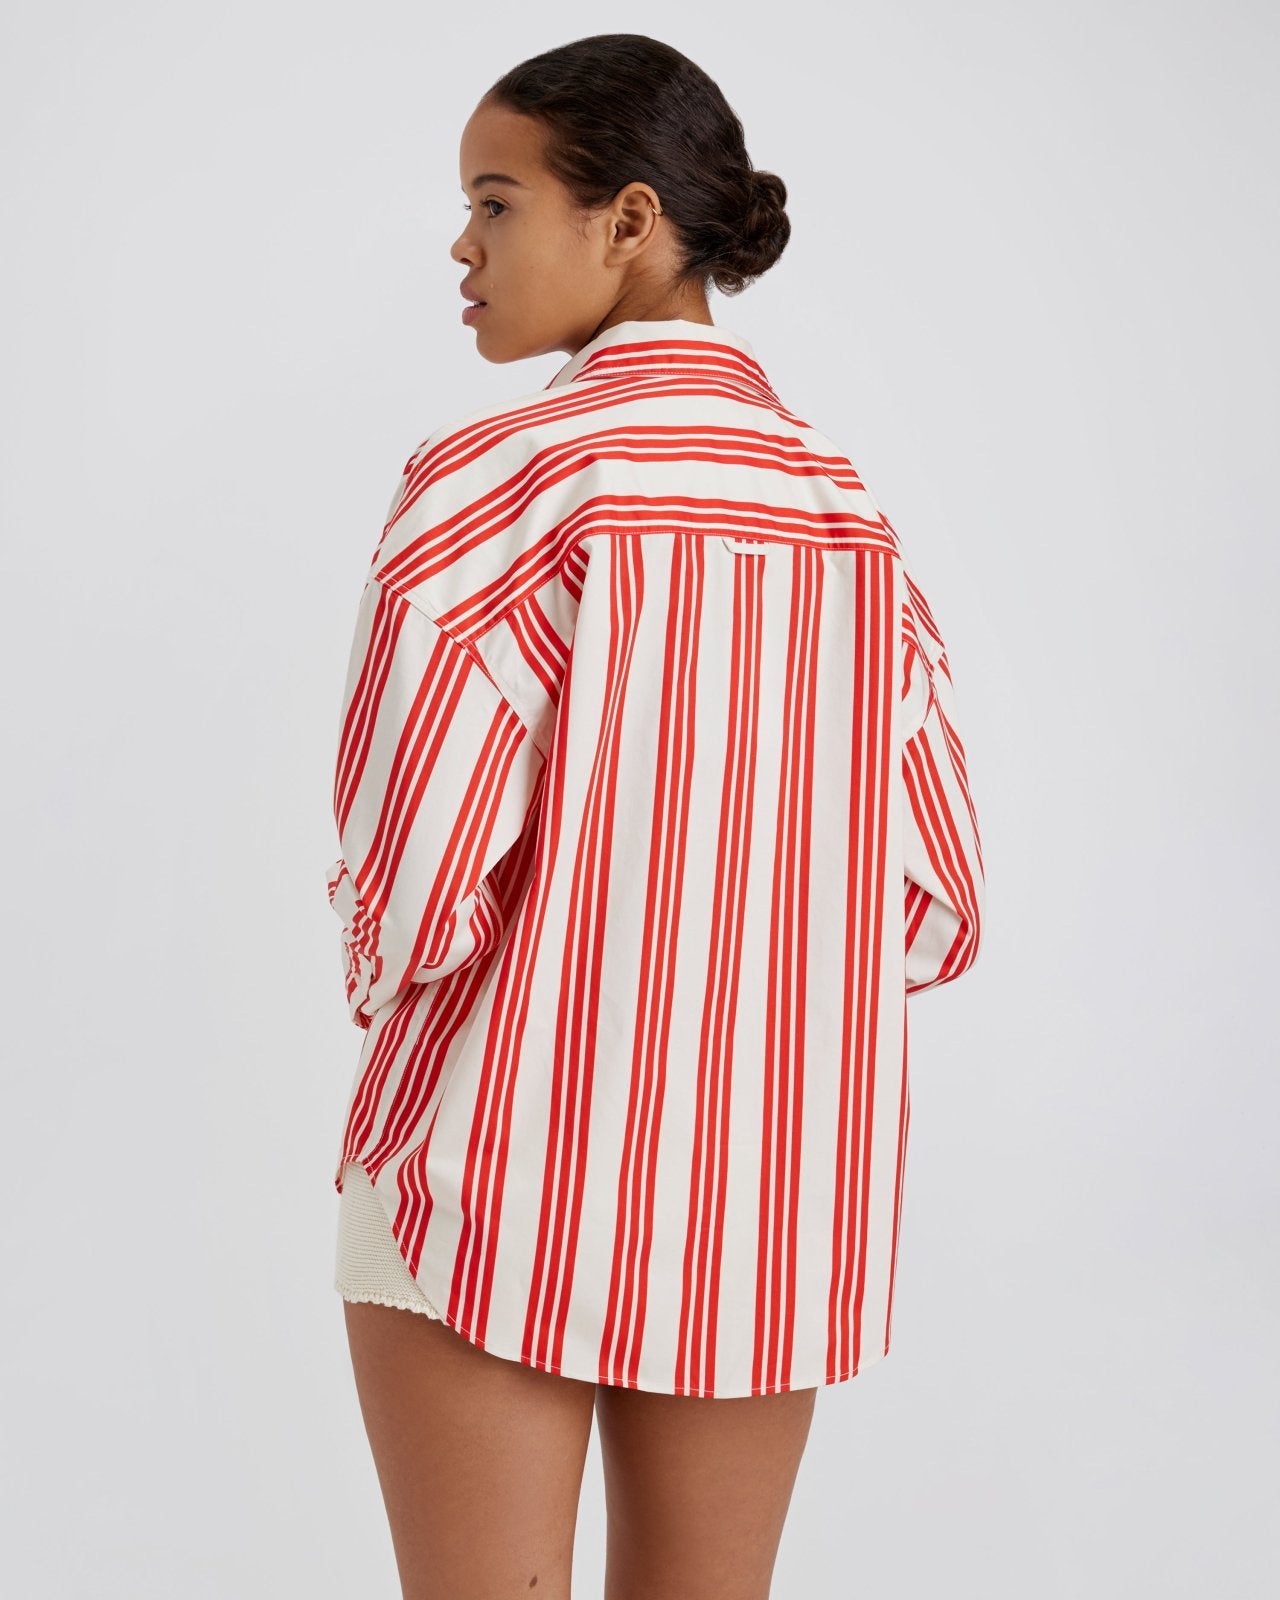 The Dylan Button Down Shirt - Solid & Striped